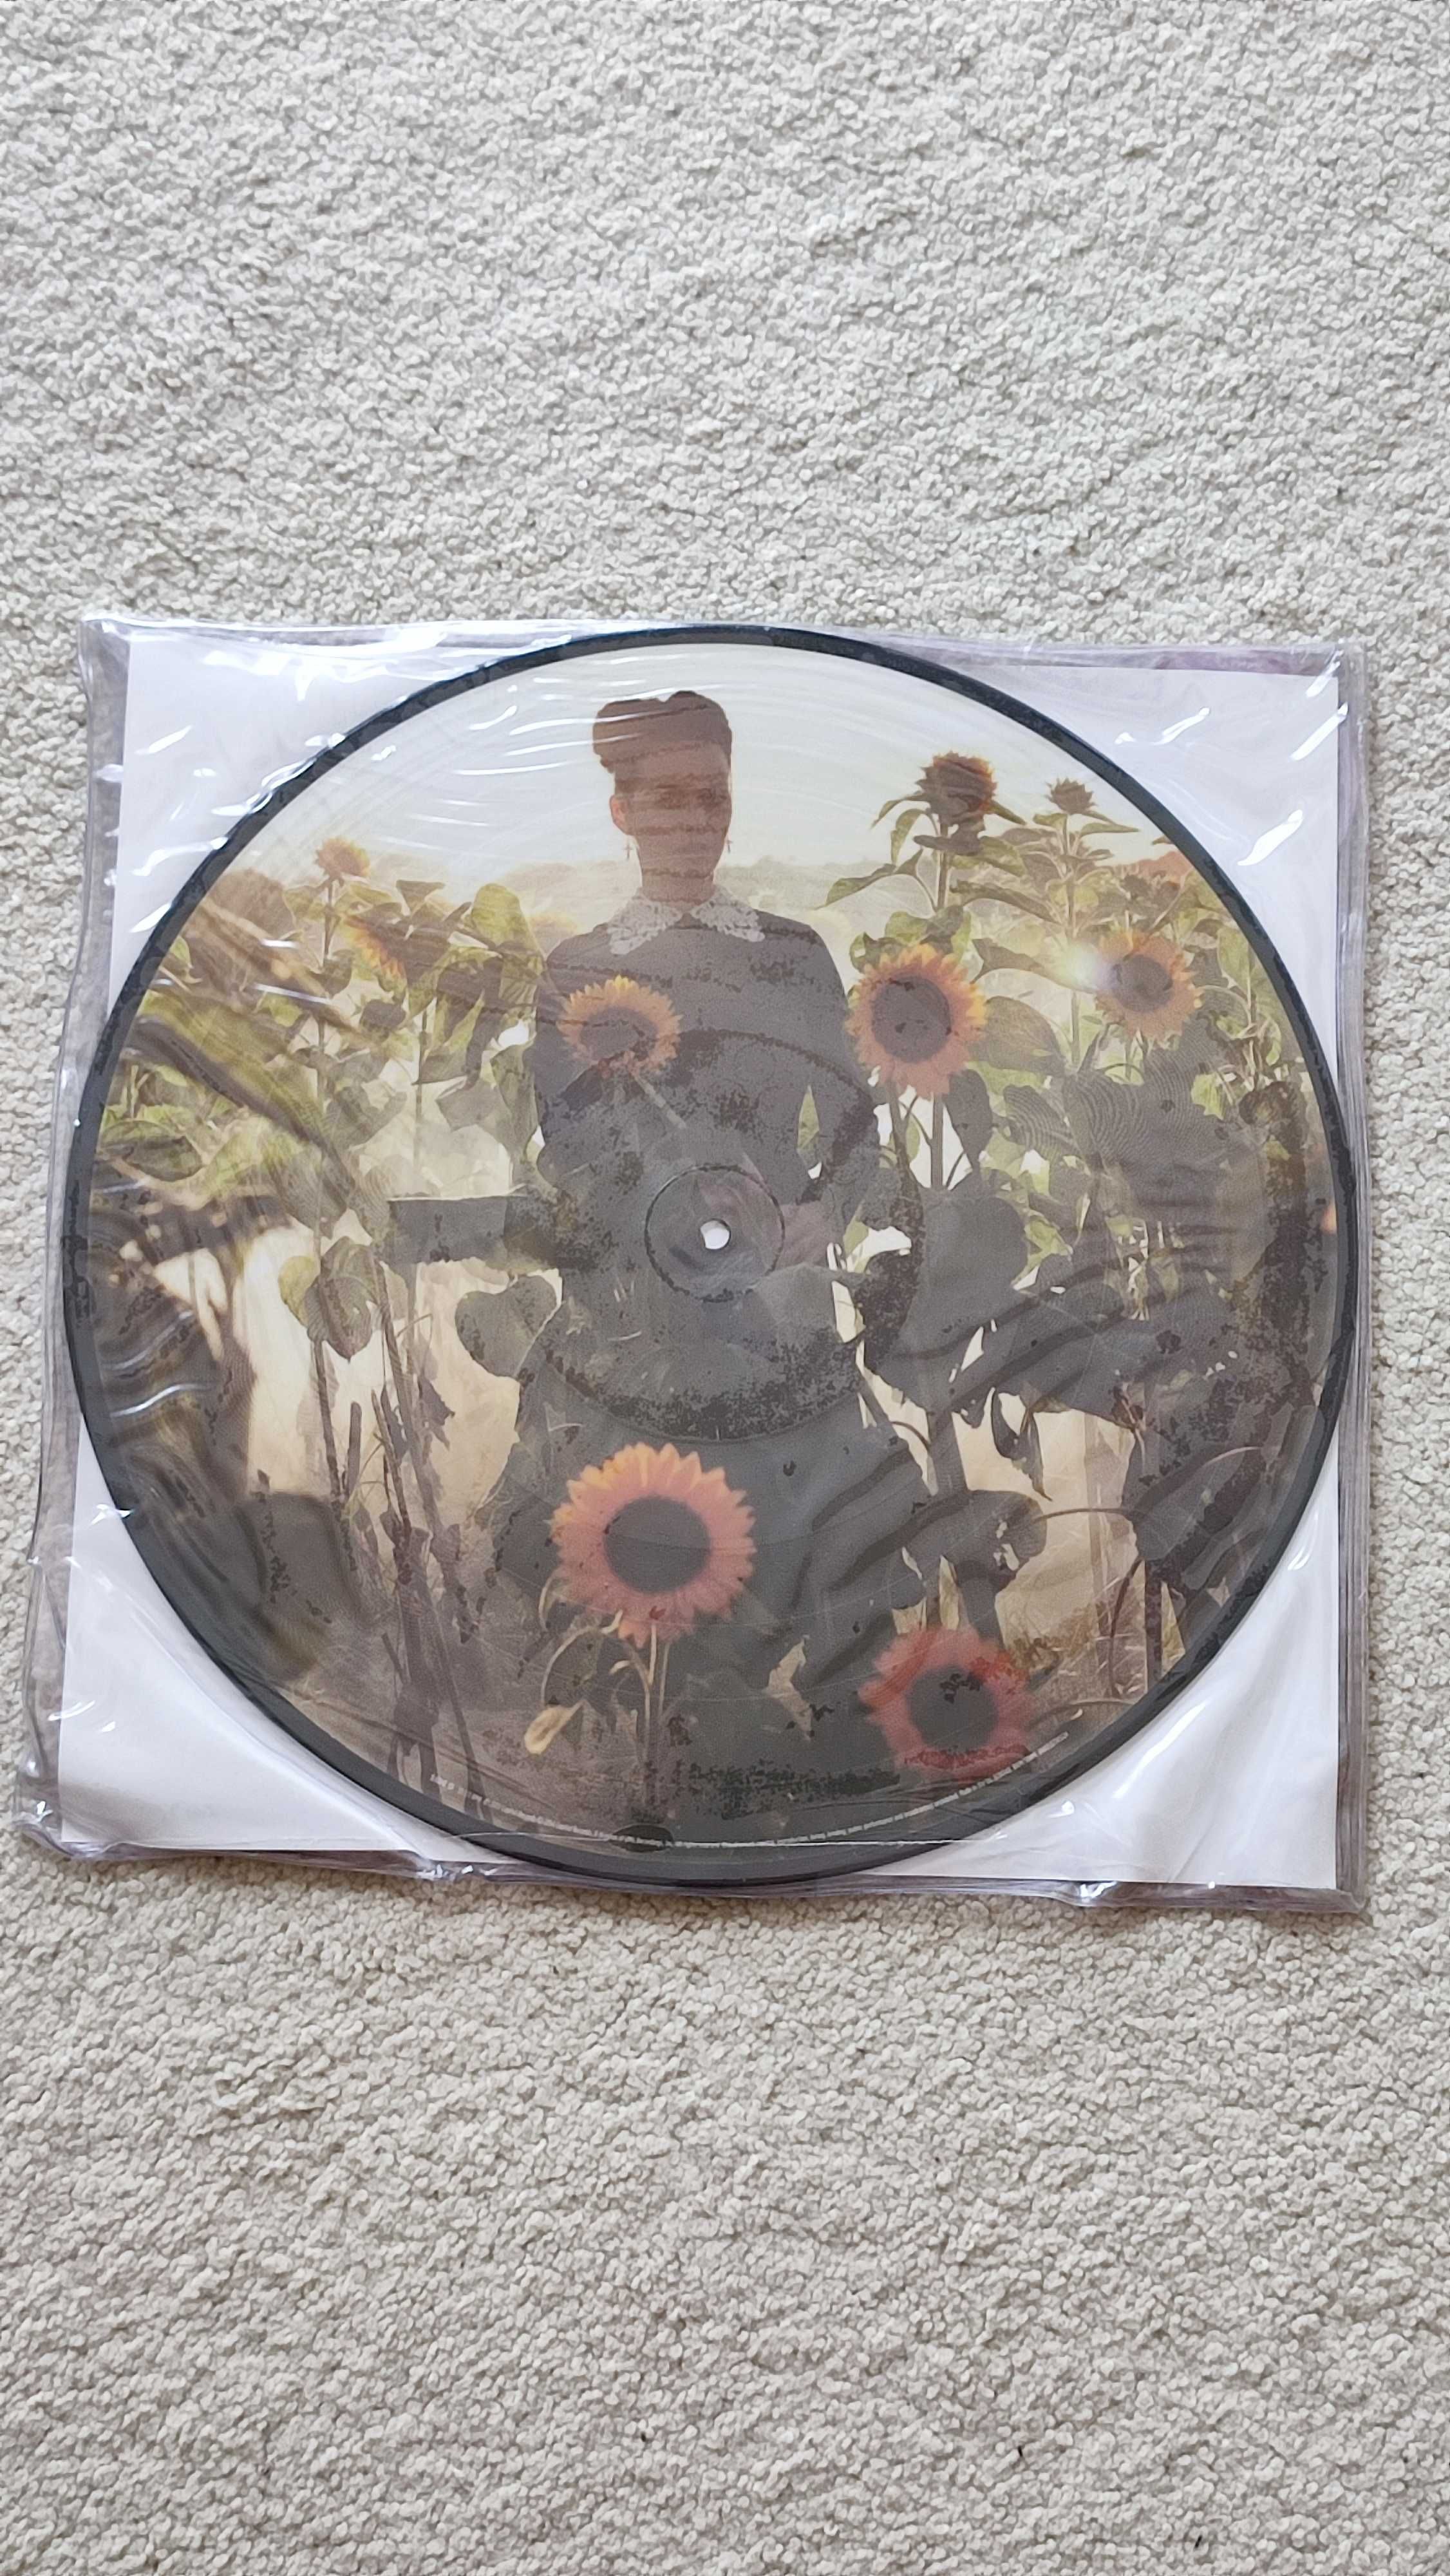 Katy Perry – Prism 2 x LP Winyl Limited Edition Picture Disc